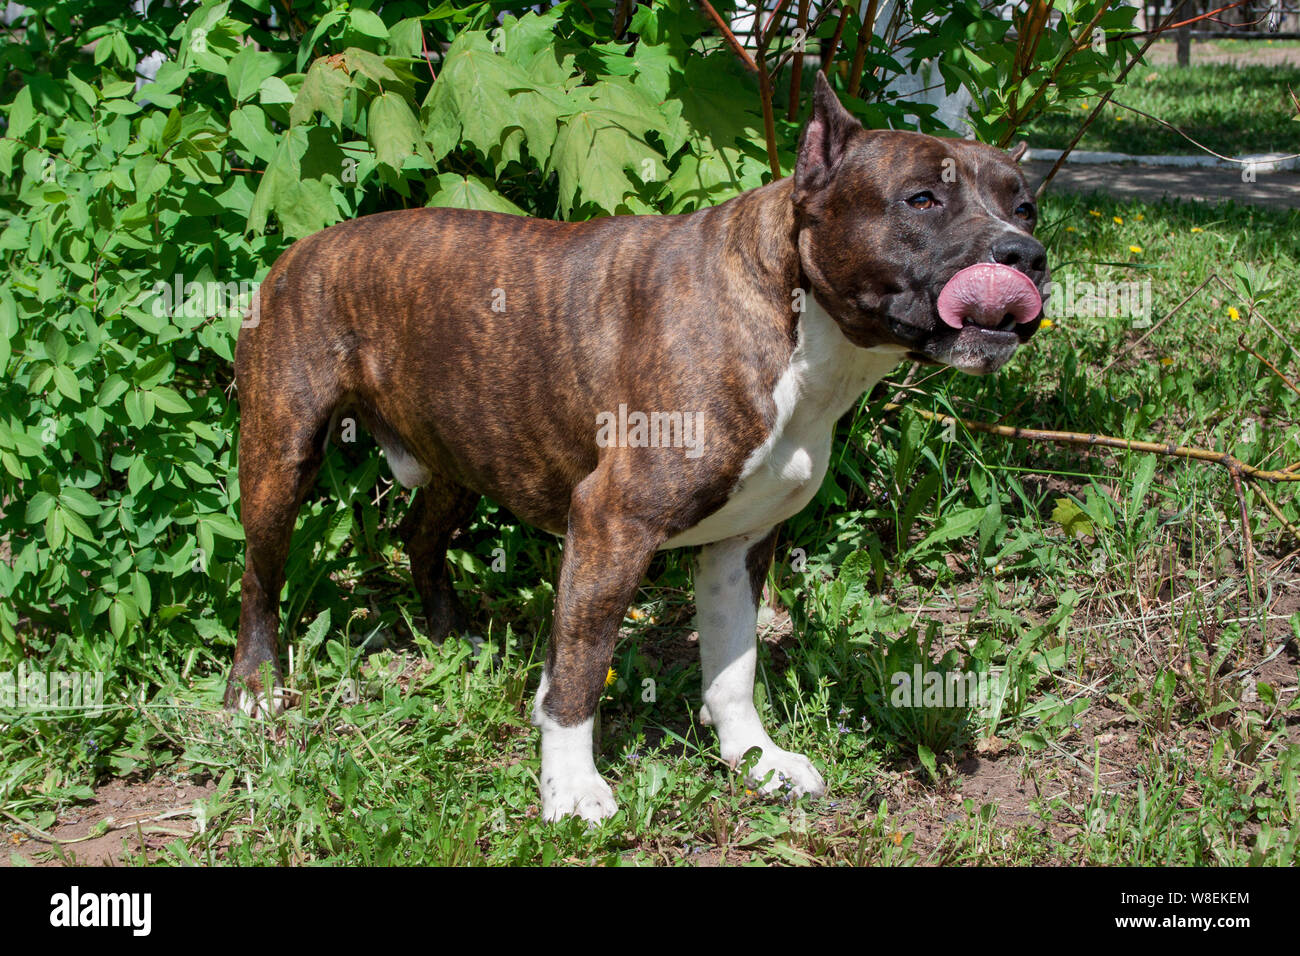 American staffordshire terrier puppy is standing by the green bush. Pet animals. Stock Photo